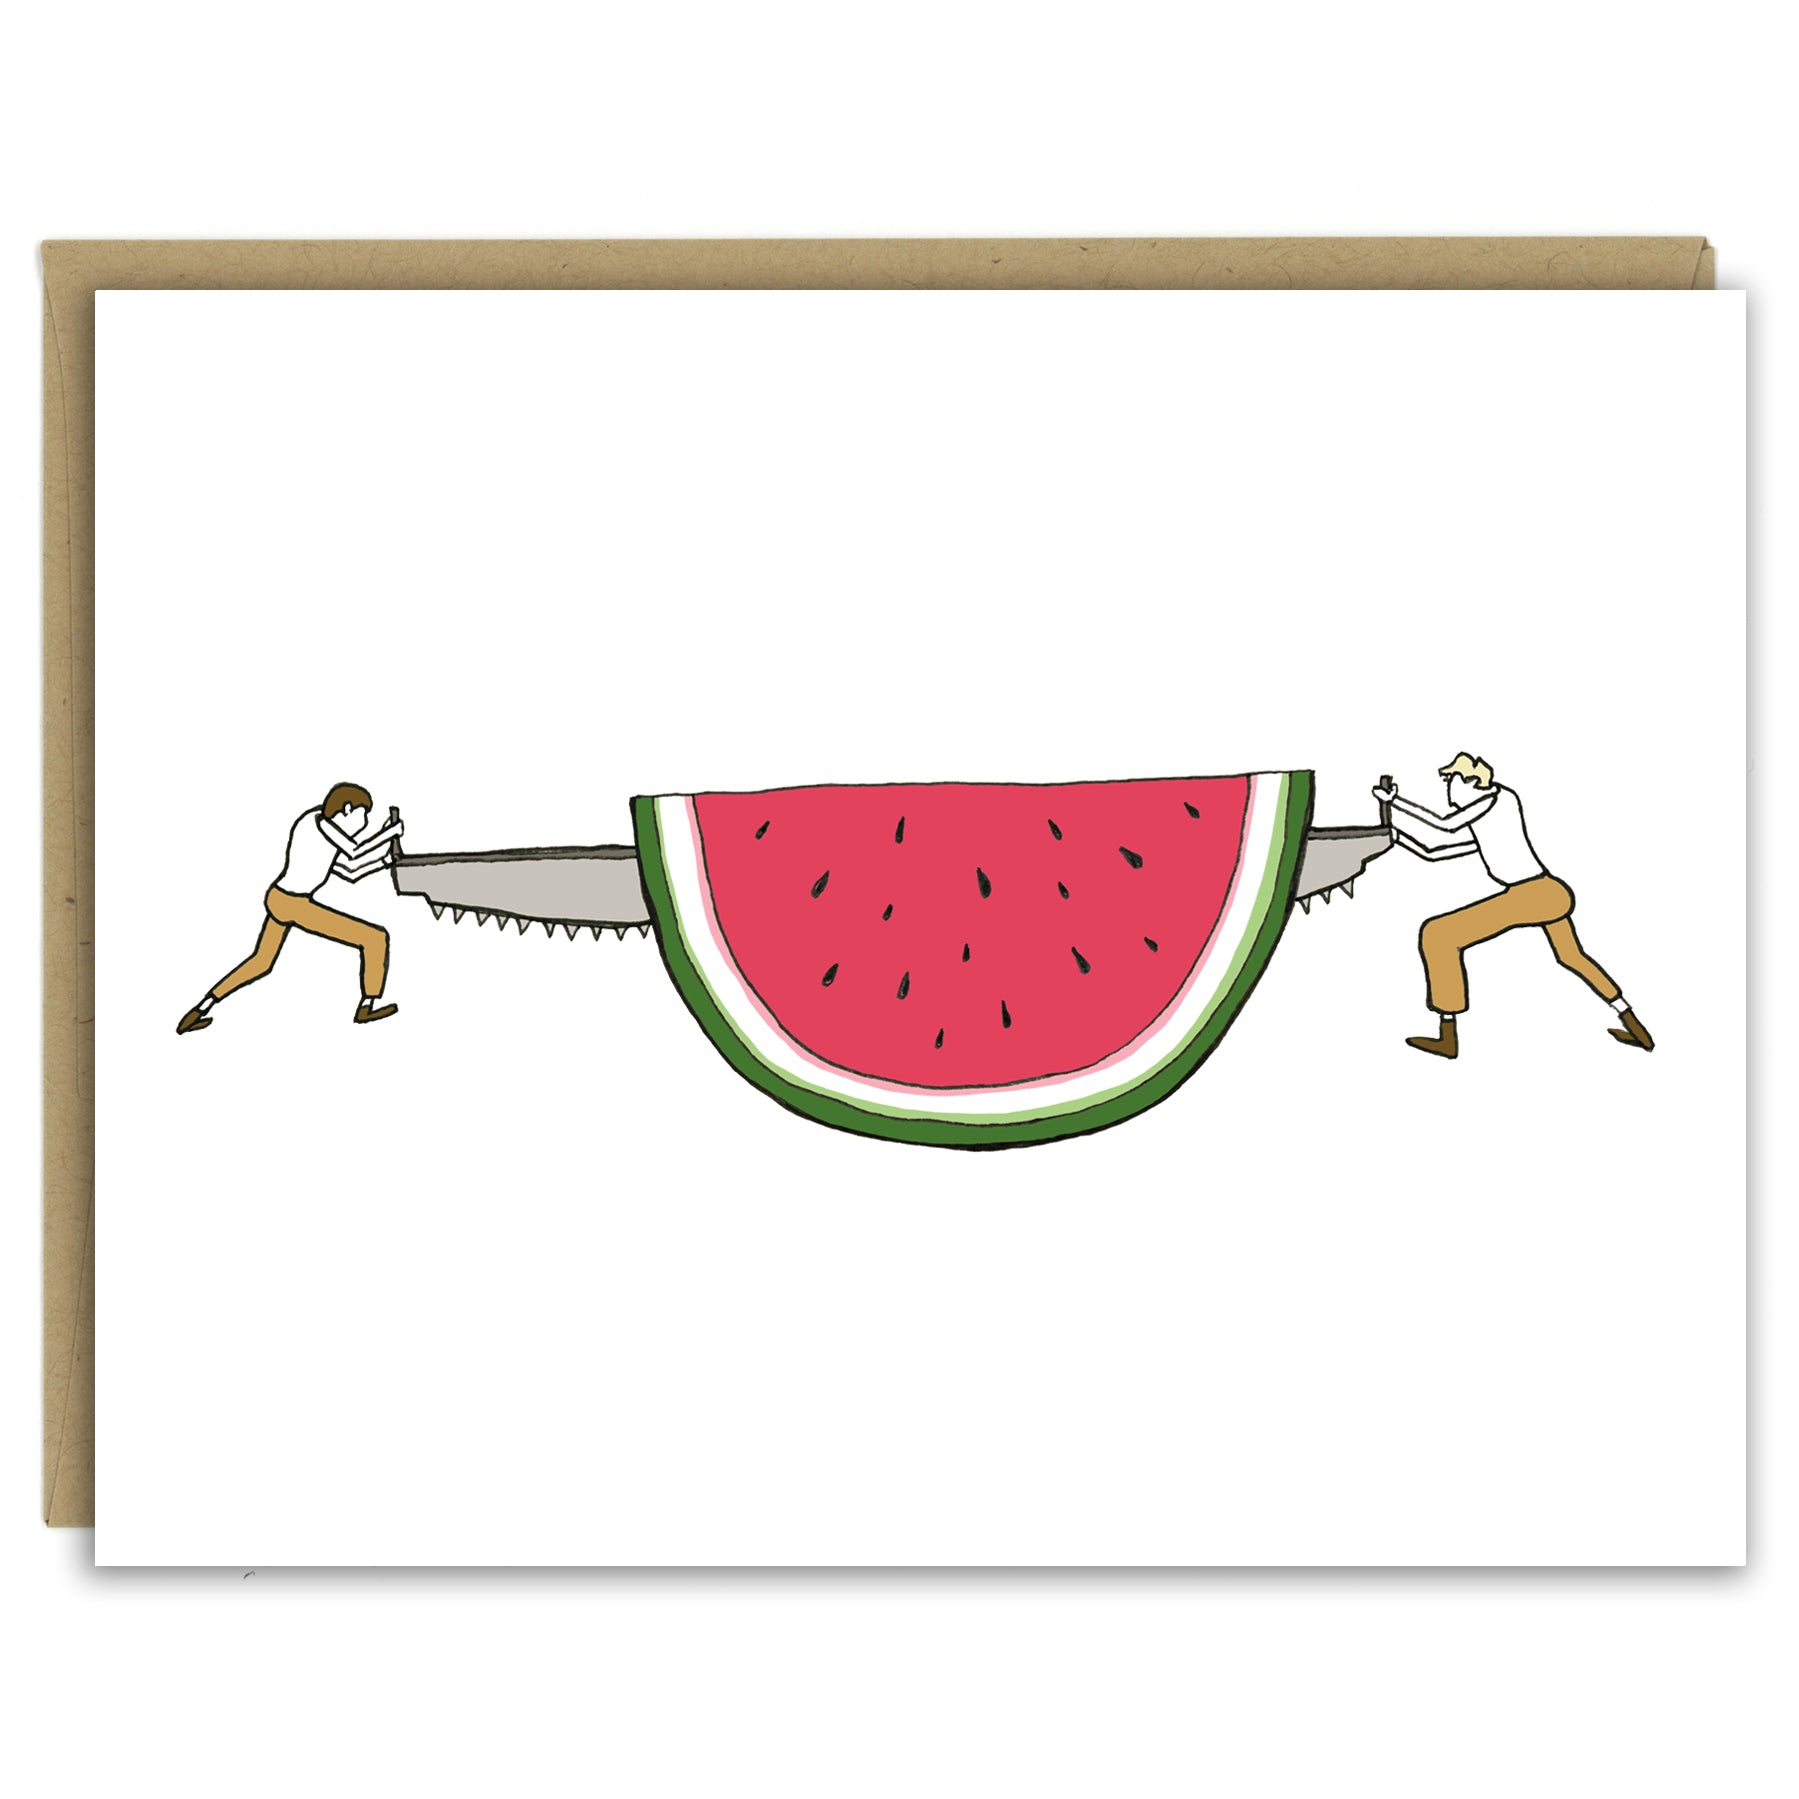 A pair of loggers saws off a slice of a giant watermelon in a hand-drawn illustration on a greeting card. Seen with a Kraft paper envelope on a white background.